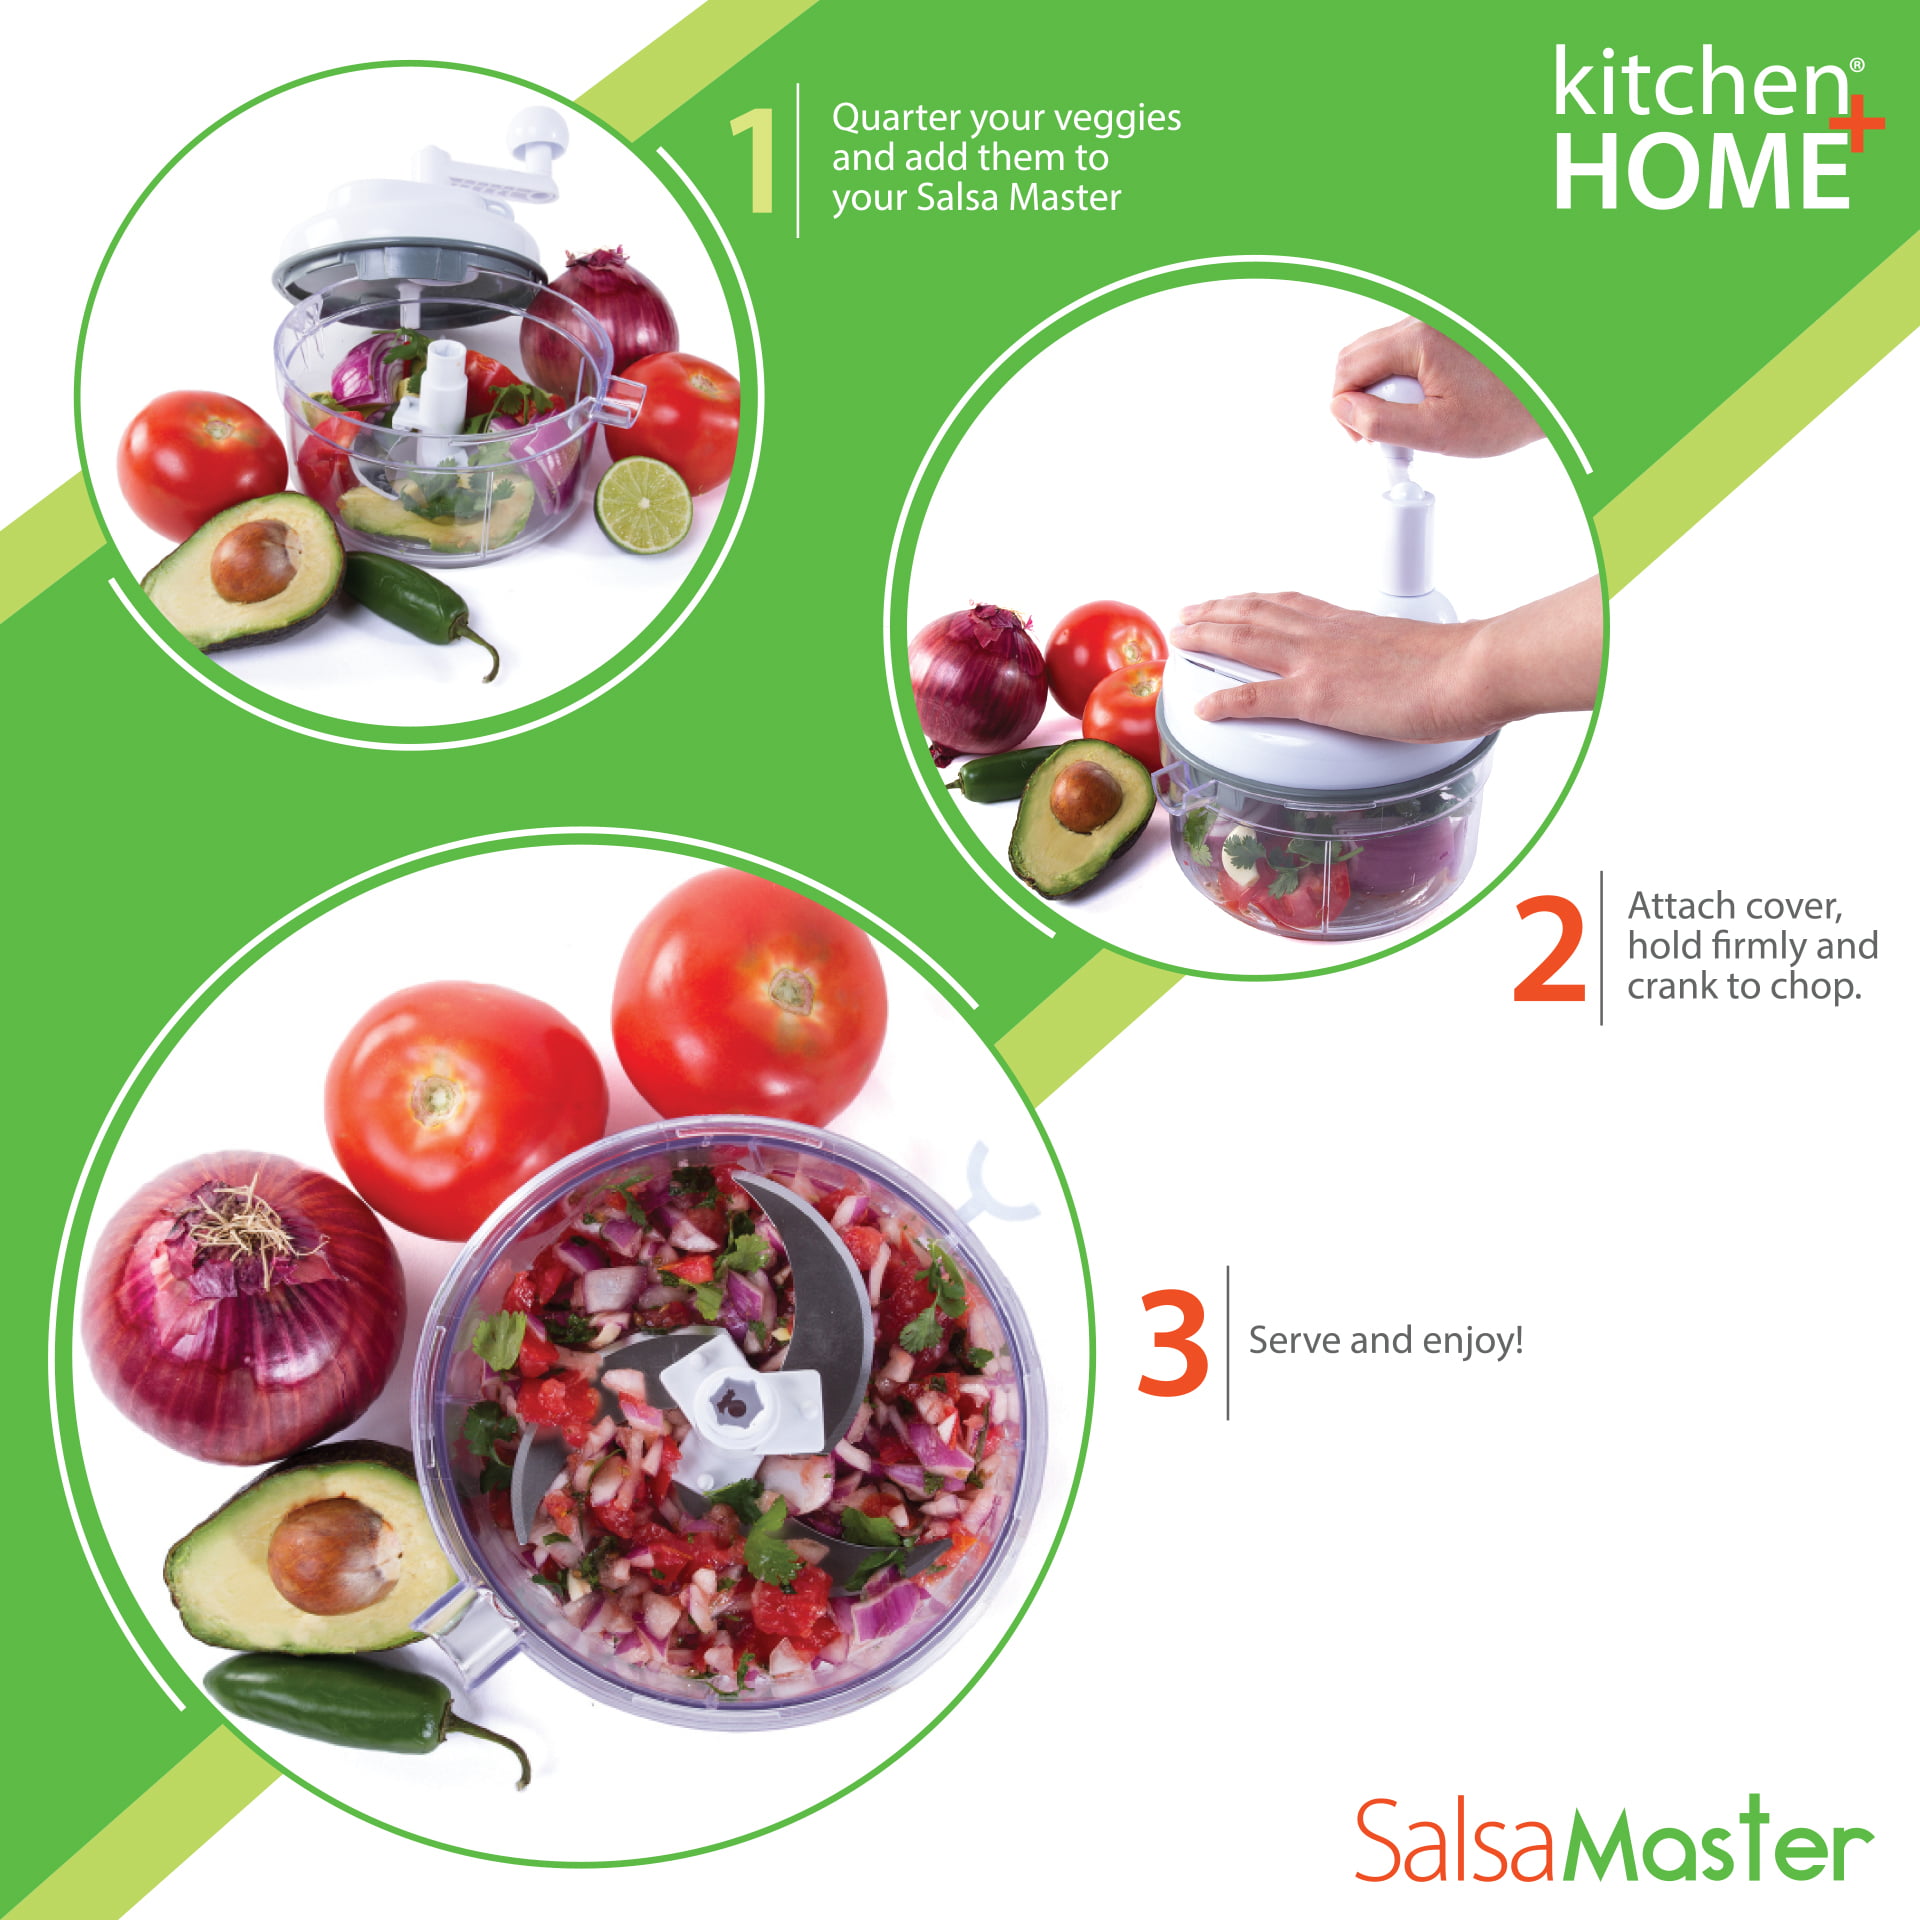  Manual Hand Vegetable Slicer with Pure Steel Blade - Salsa  Master Salsa Maker - Garlic Crusher - Handheld Food Processor - Rotary  Style Slicer Dicers BPA Free Chopper For Nuts, Fruits